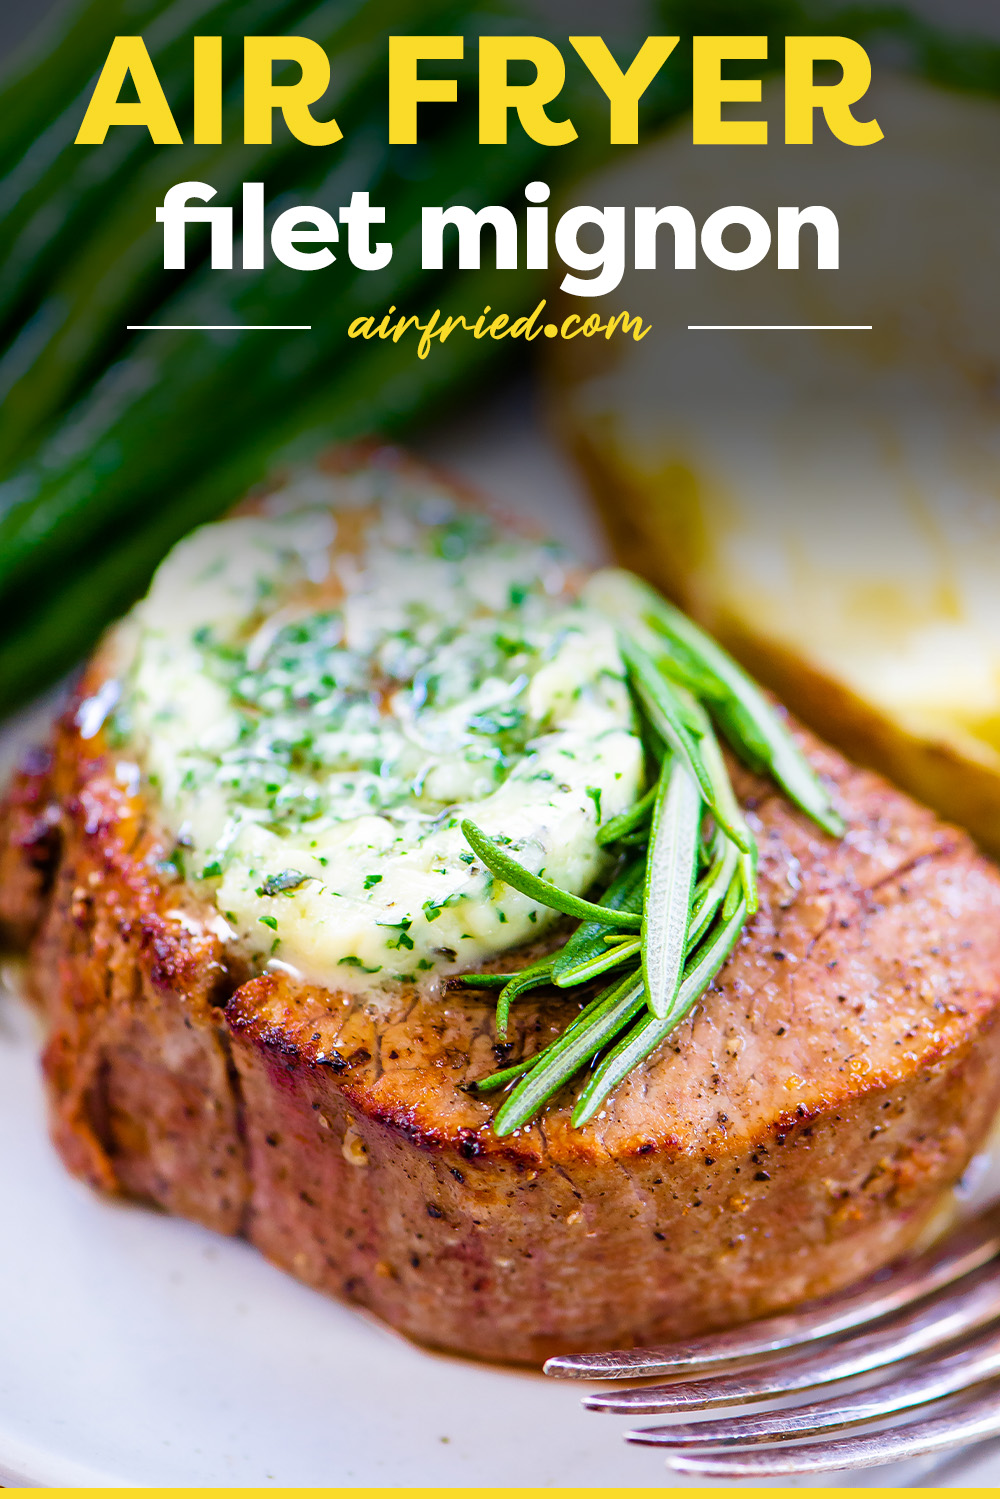 Filet mignon topped with garlic butter.